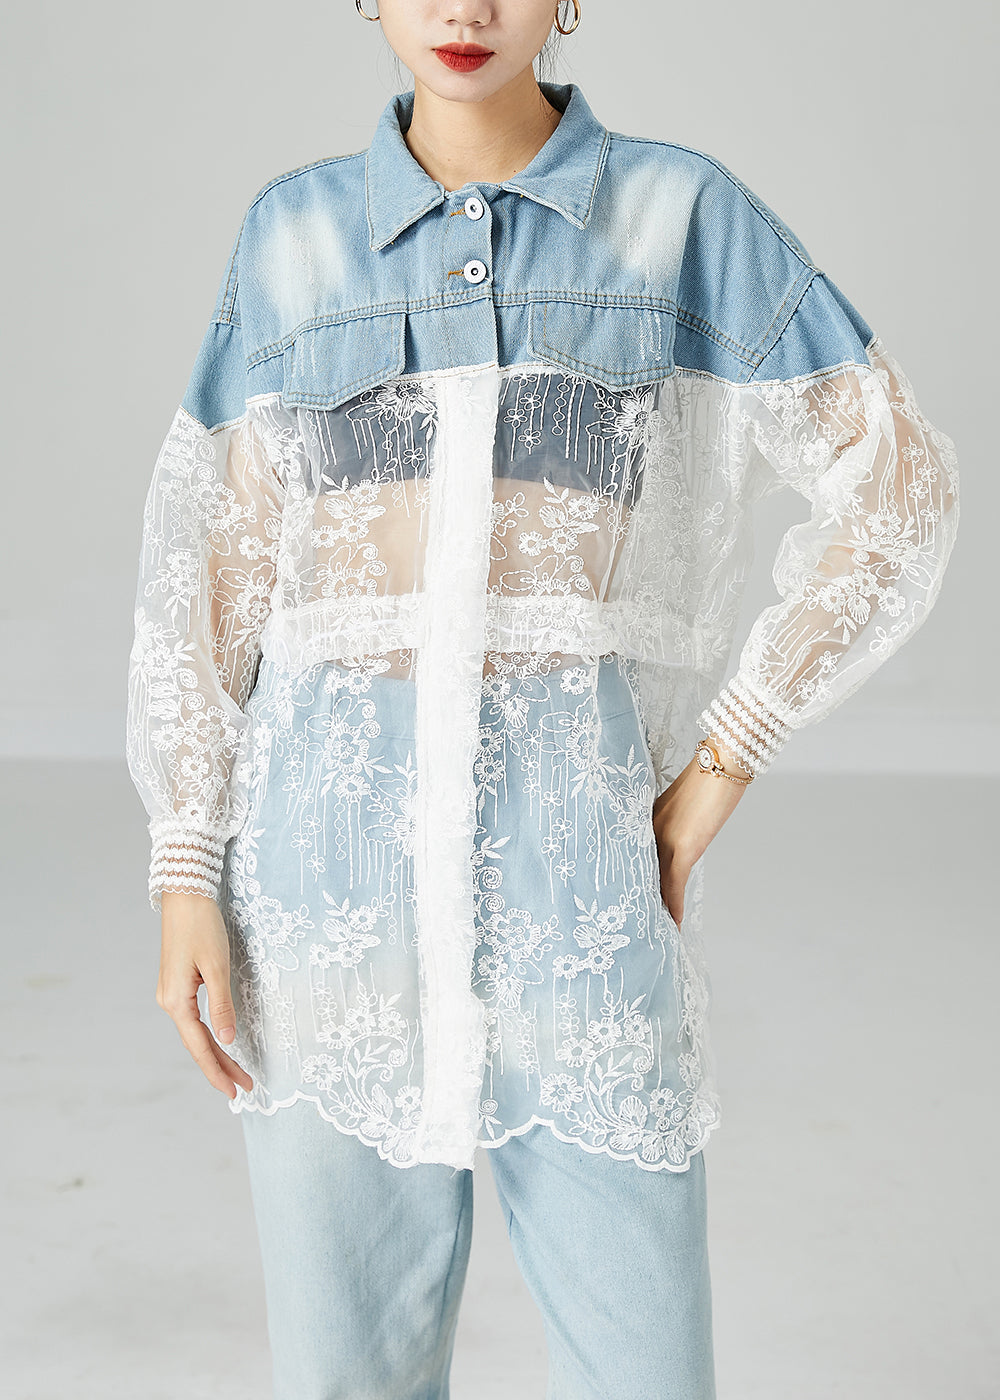 Classy Colorblock Embroideried Patchwork Hollow Out Denim Coat Outwear Summer